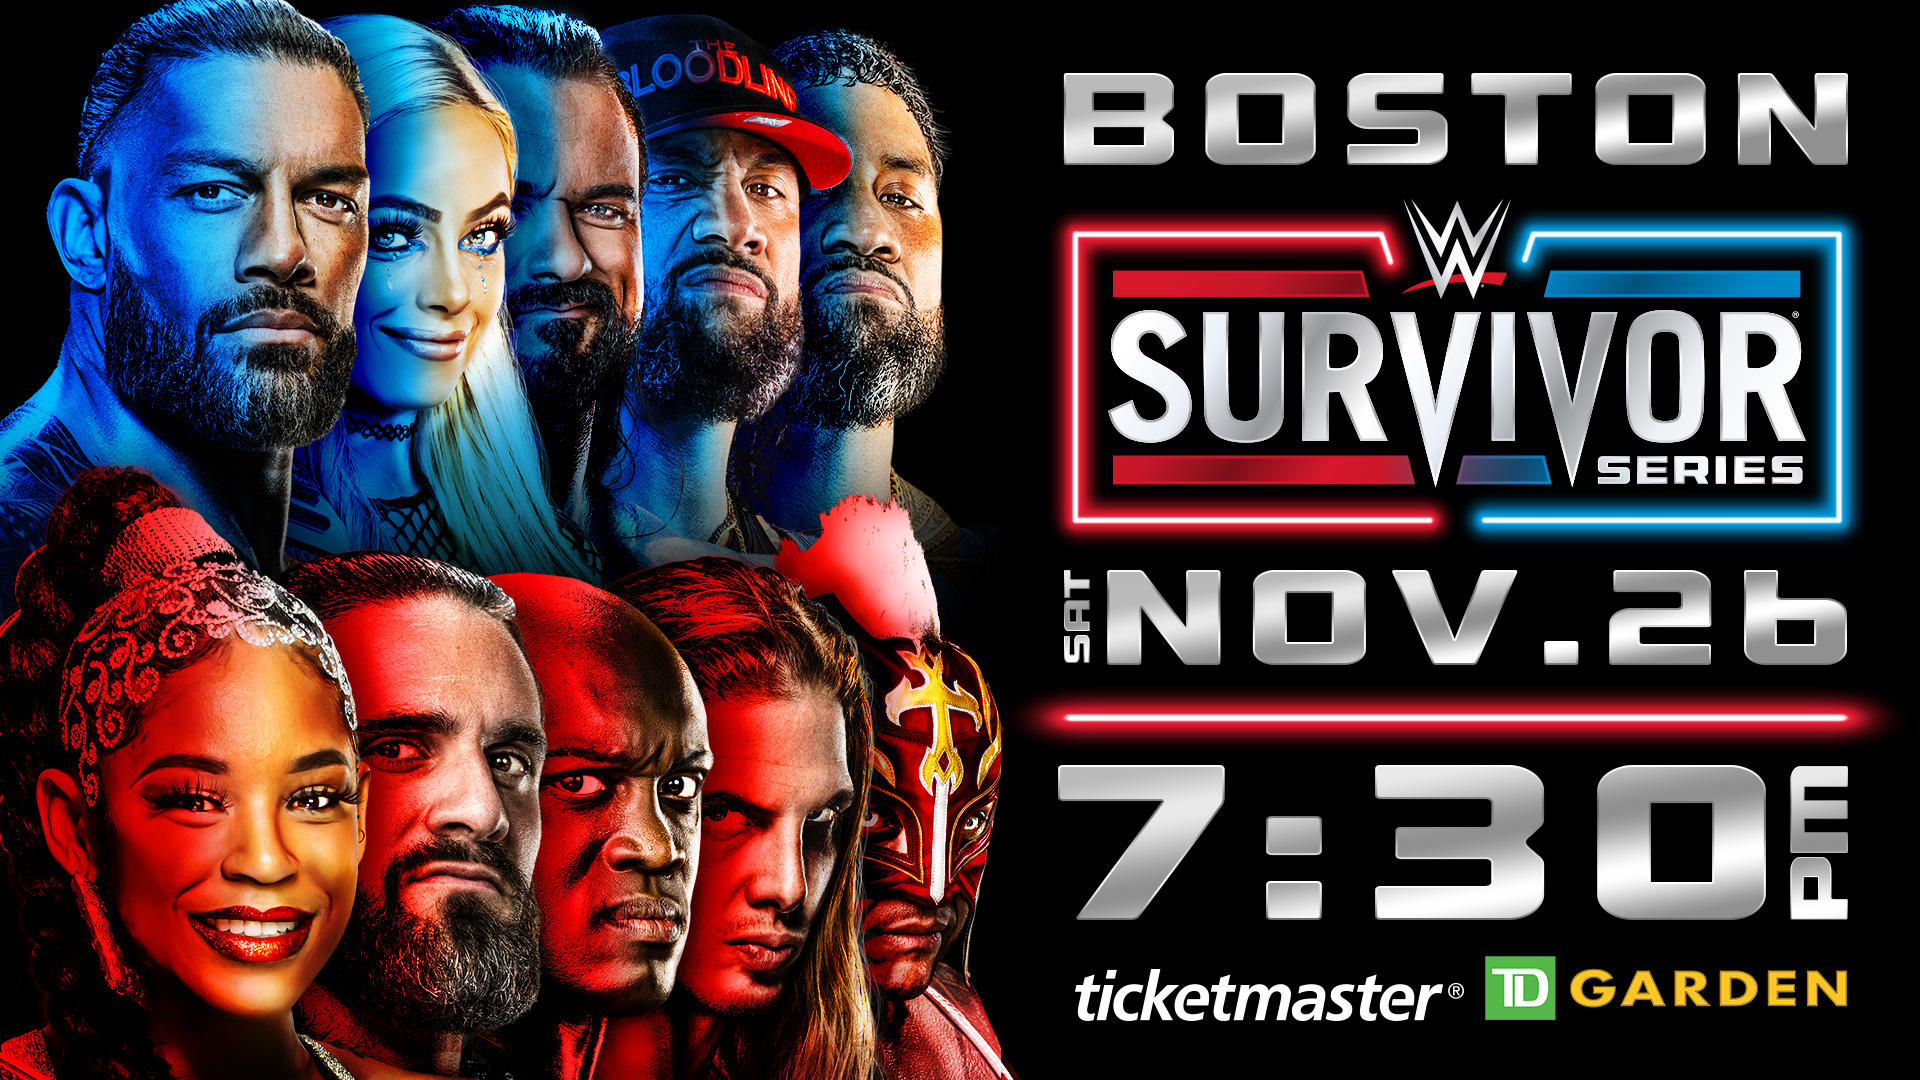 WWE Survivor Series On Location Packages Selling Out, Update on